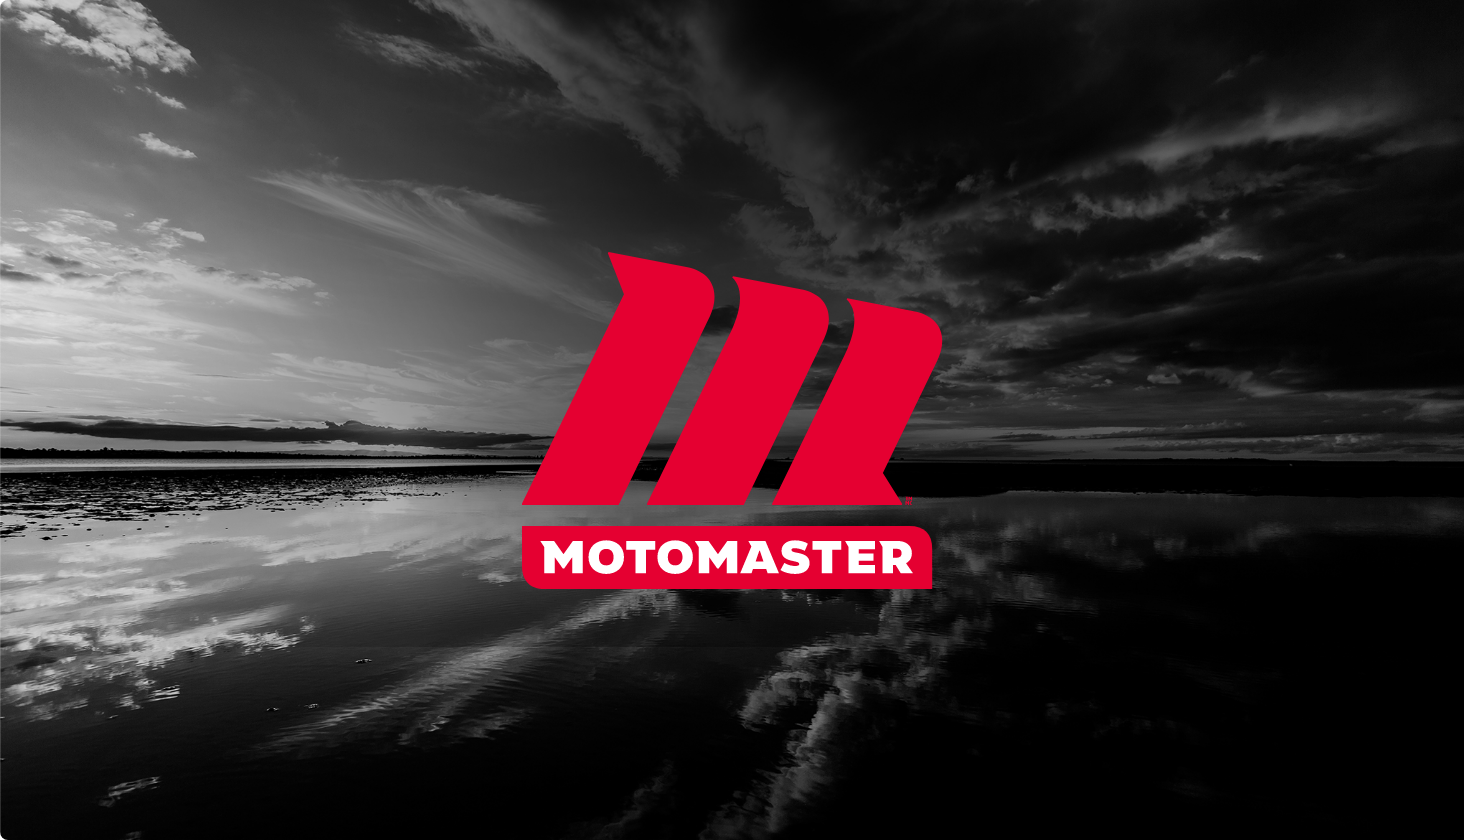 MotoMaster red logo with black and white sky back drop.